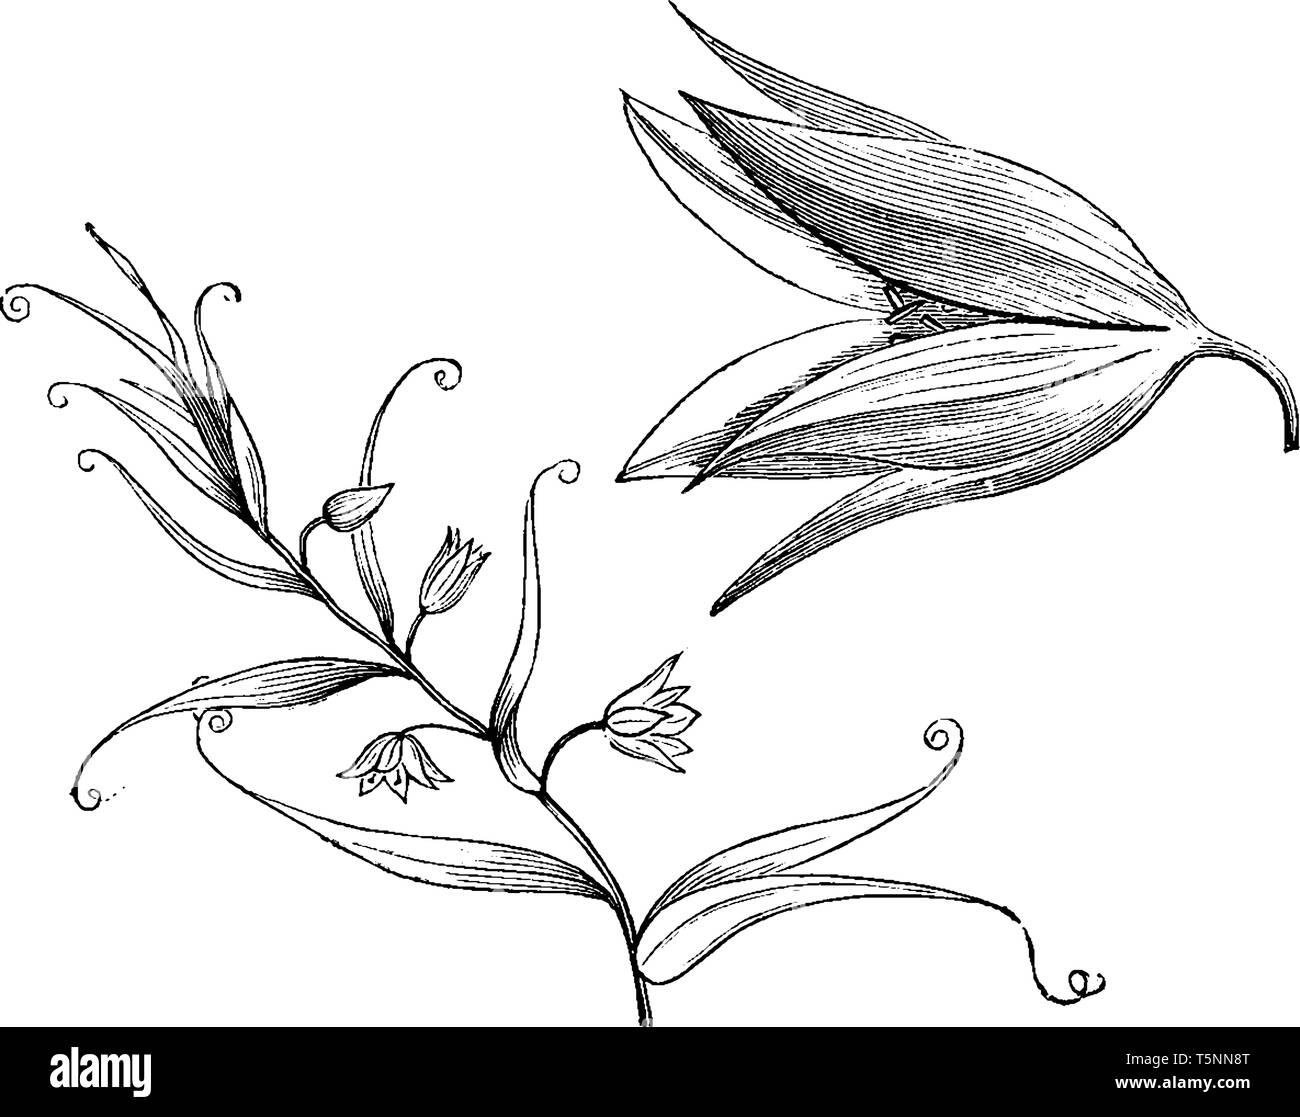 Littonia Modesta is a flowering plant. Its flowers are orange colored and bell shaped. This plant needs support to grow, vintage line drawing or engra Stock Vector